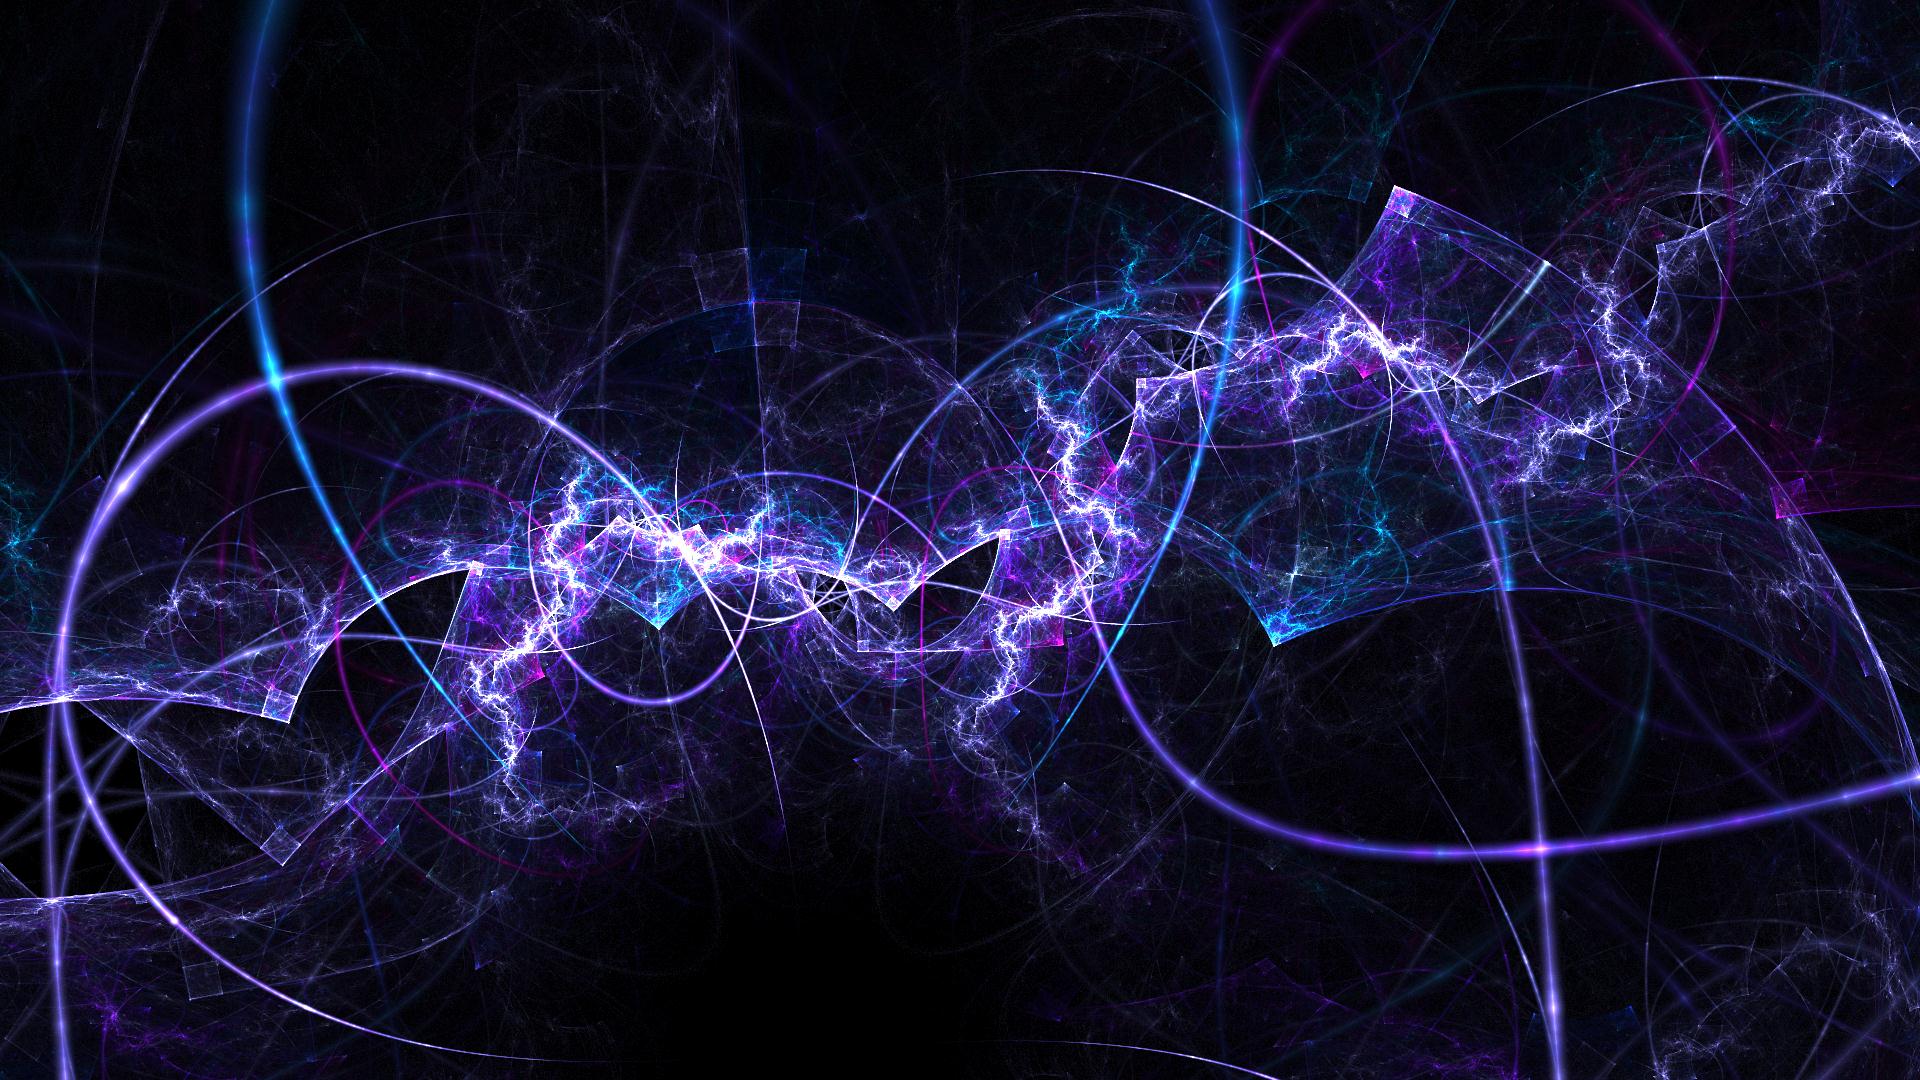 Abstract Wallpapers 1920x1080 1920x1080